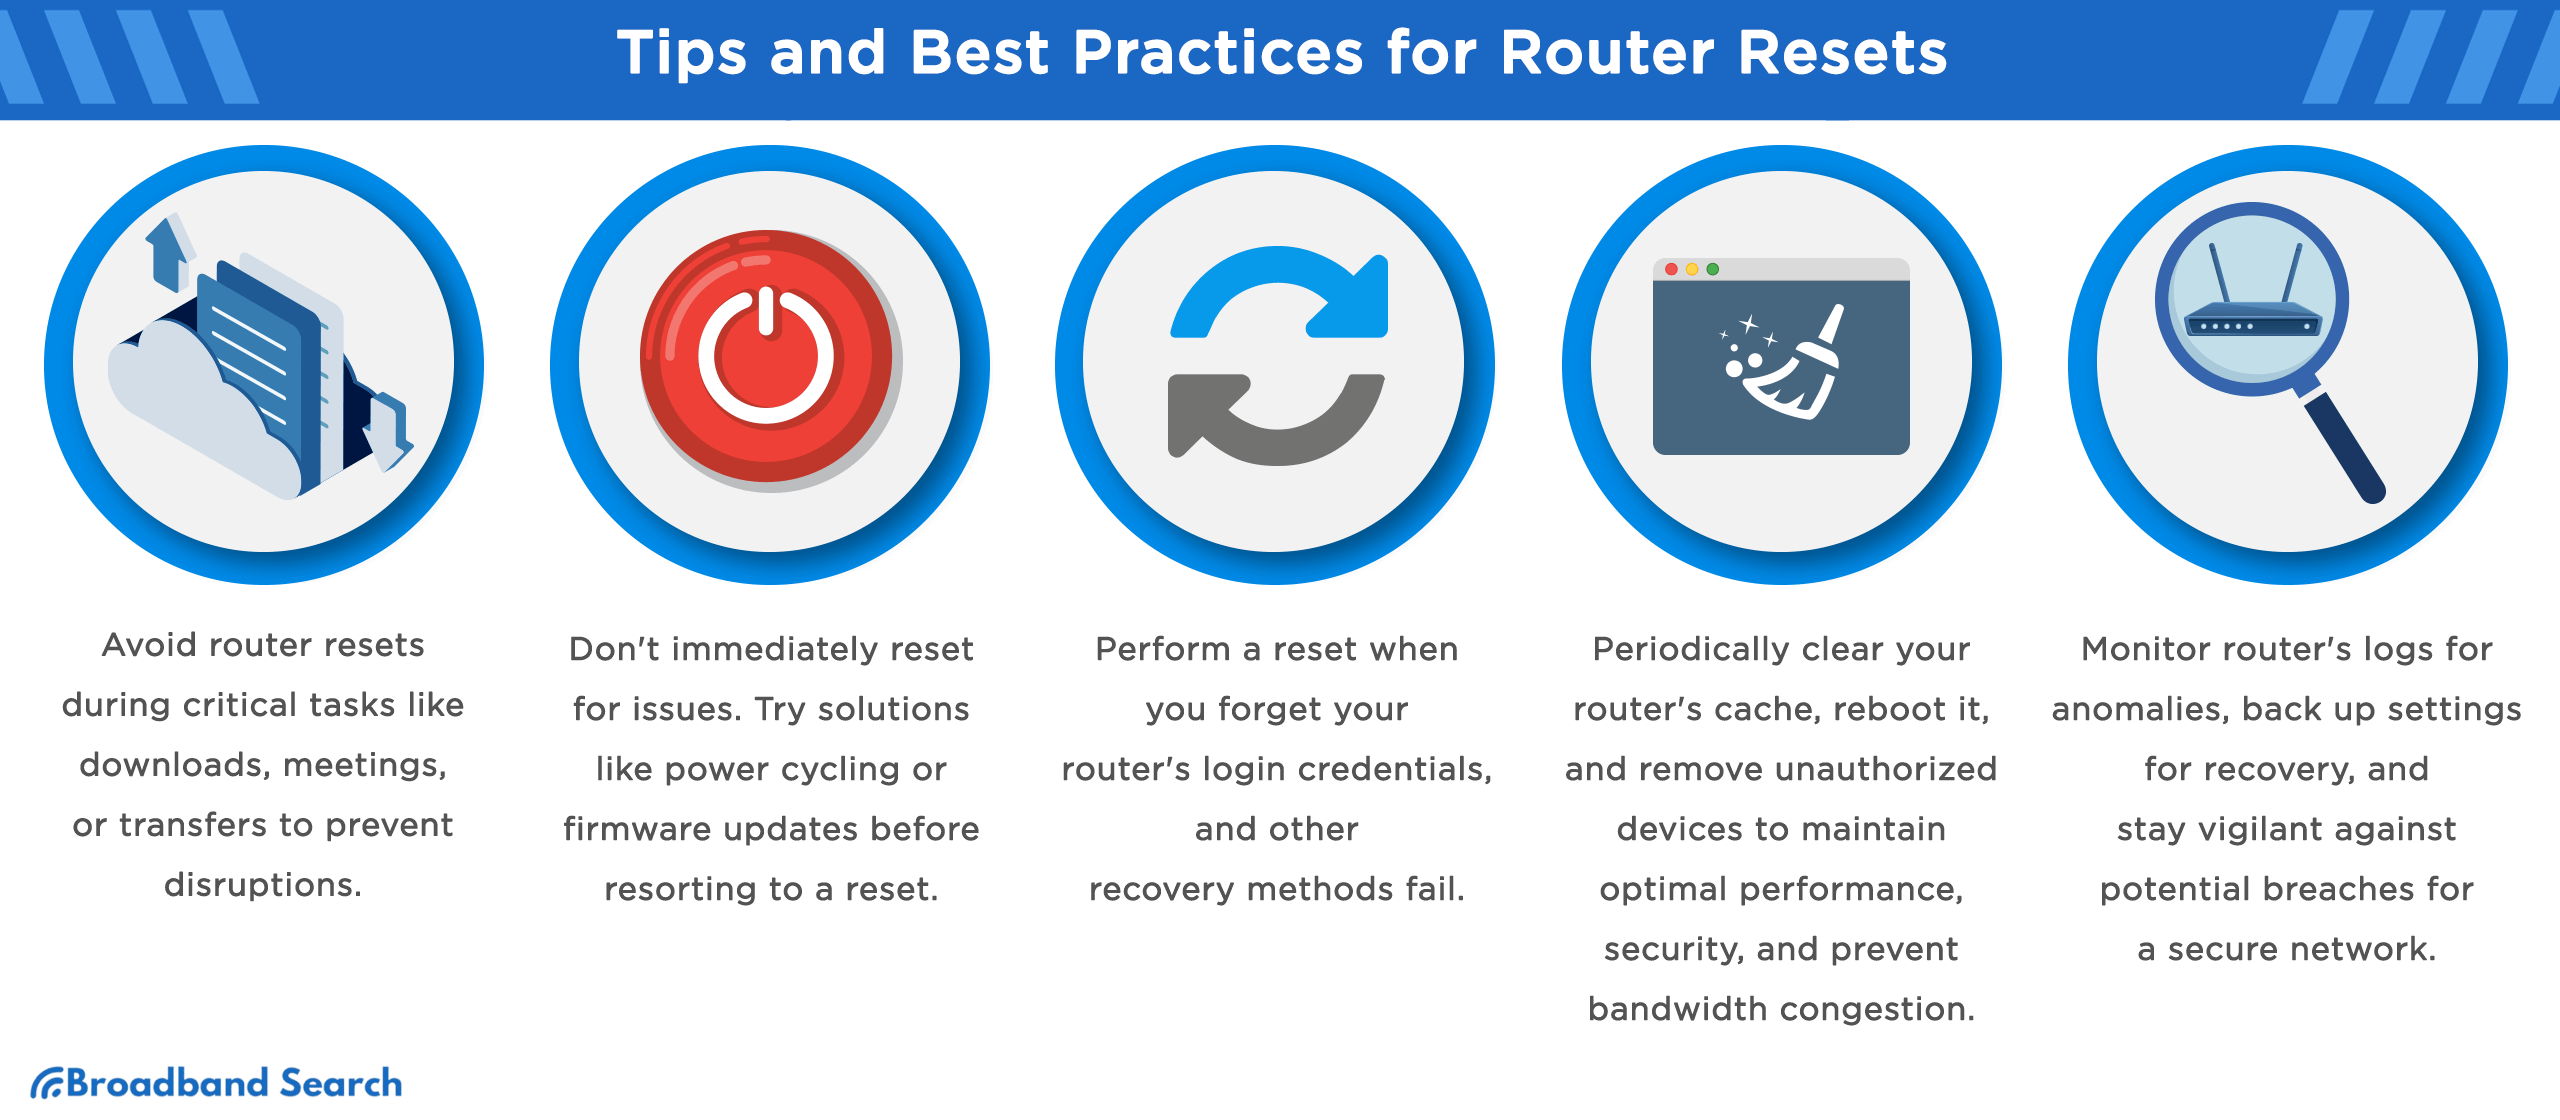 Tips and best practices for router resets